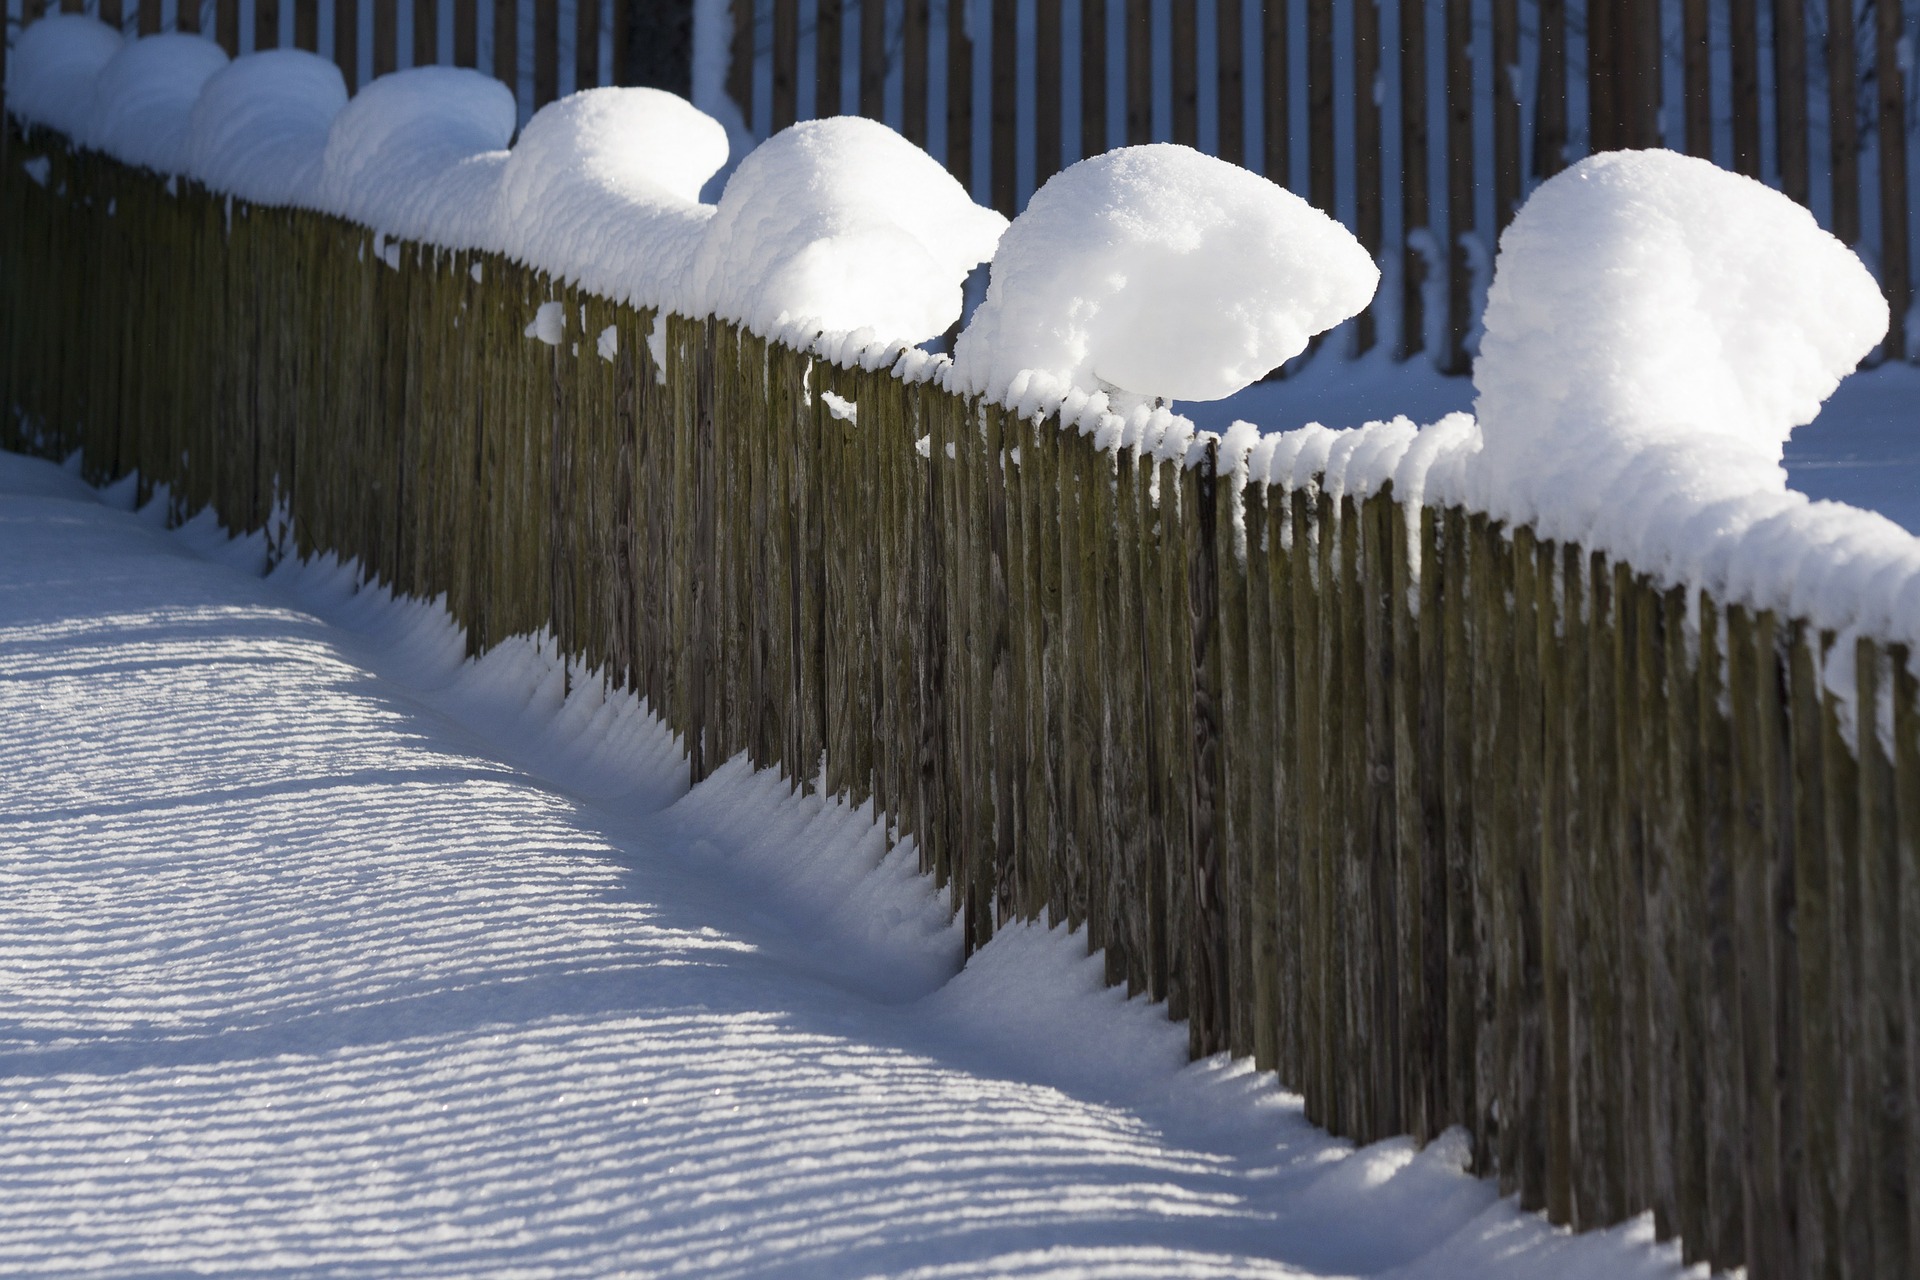 Snow on the wooden fence photo